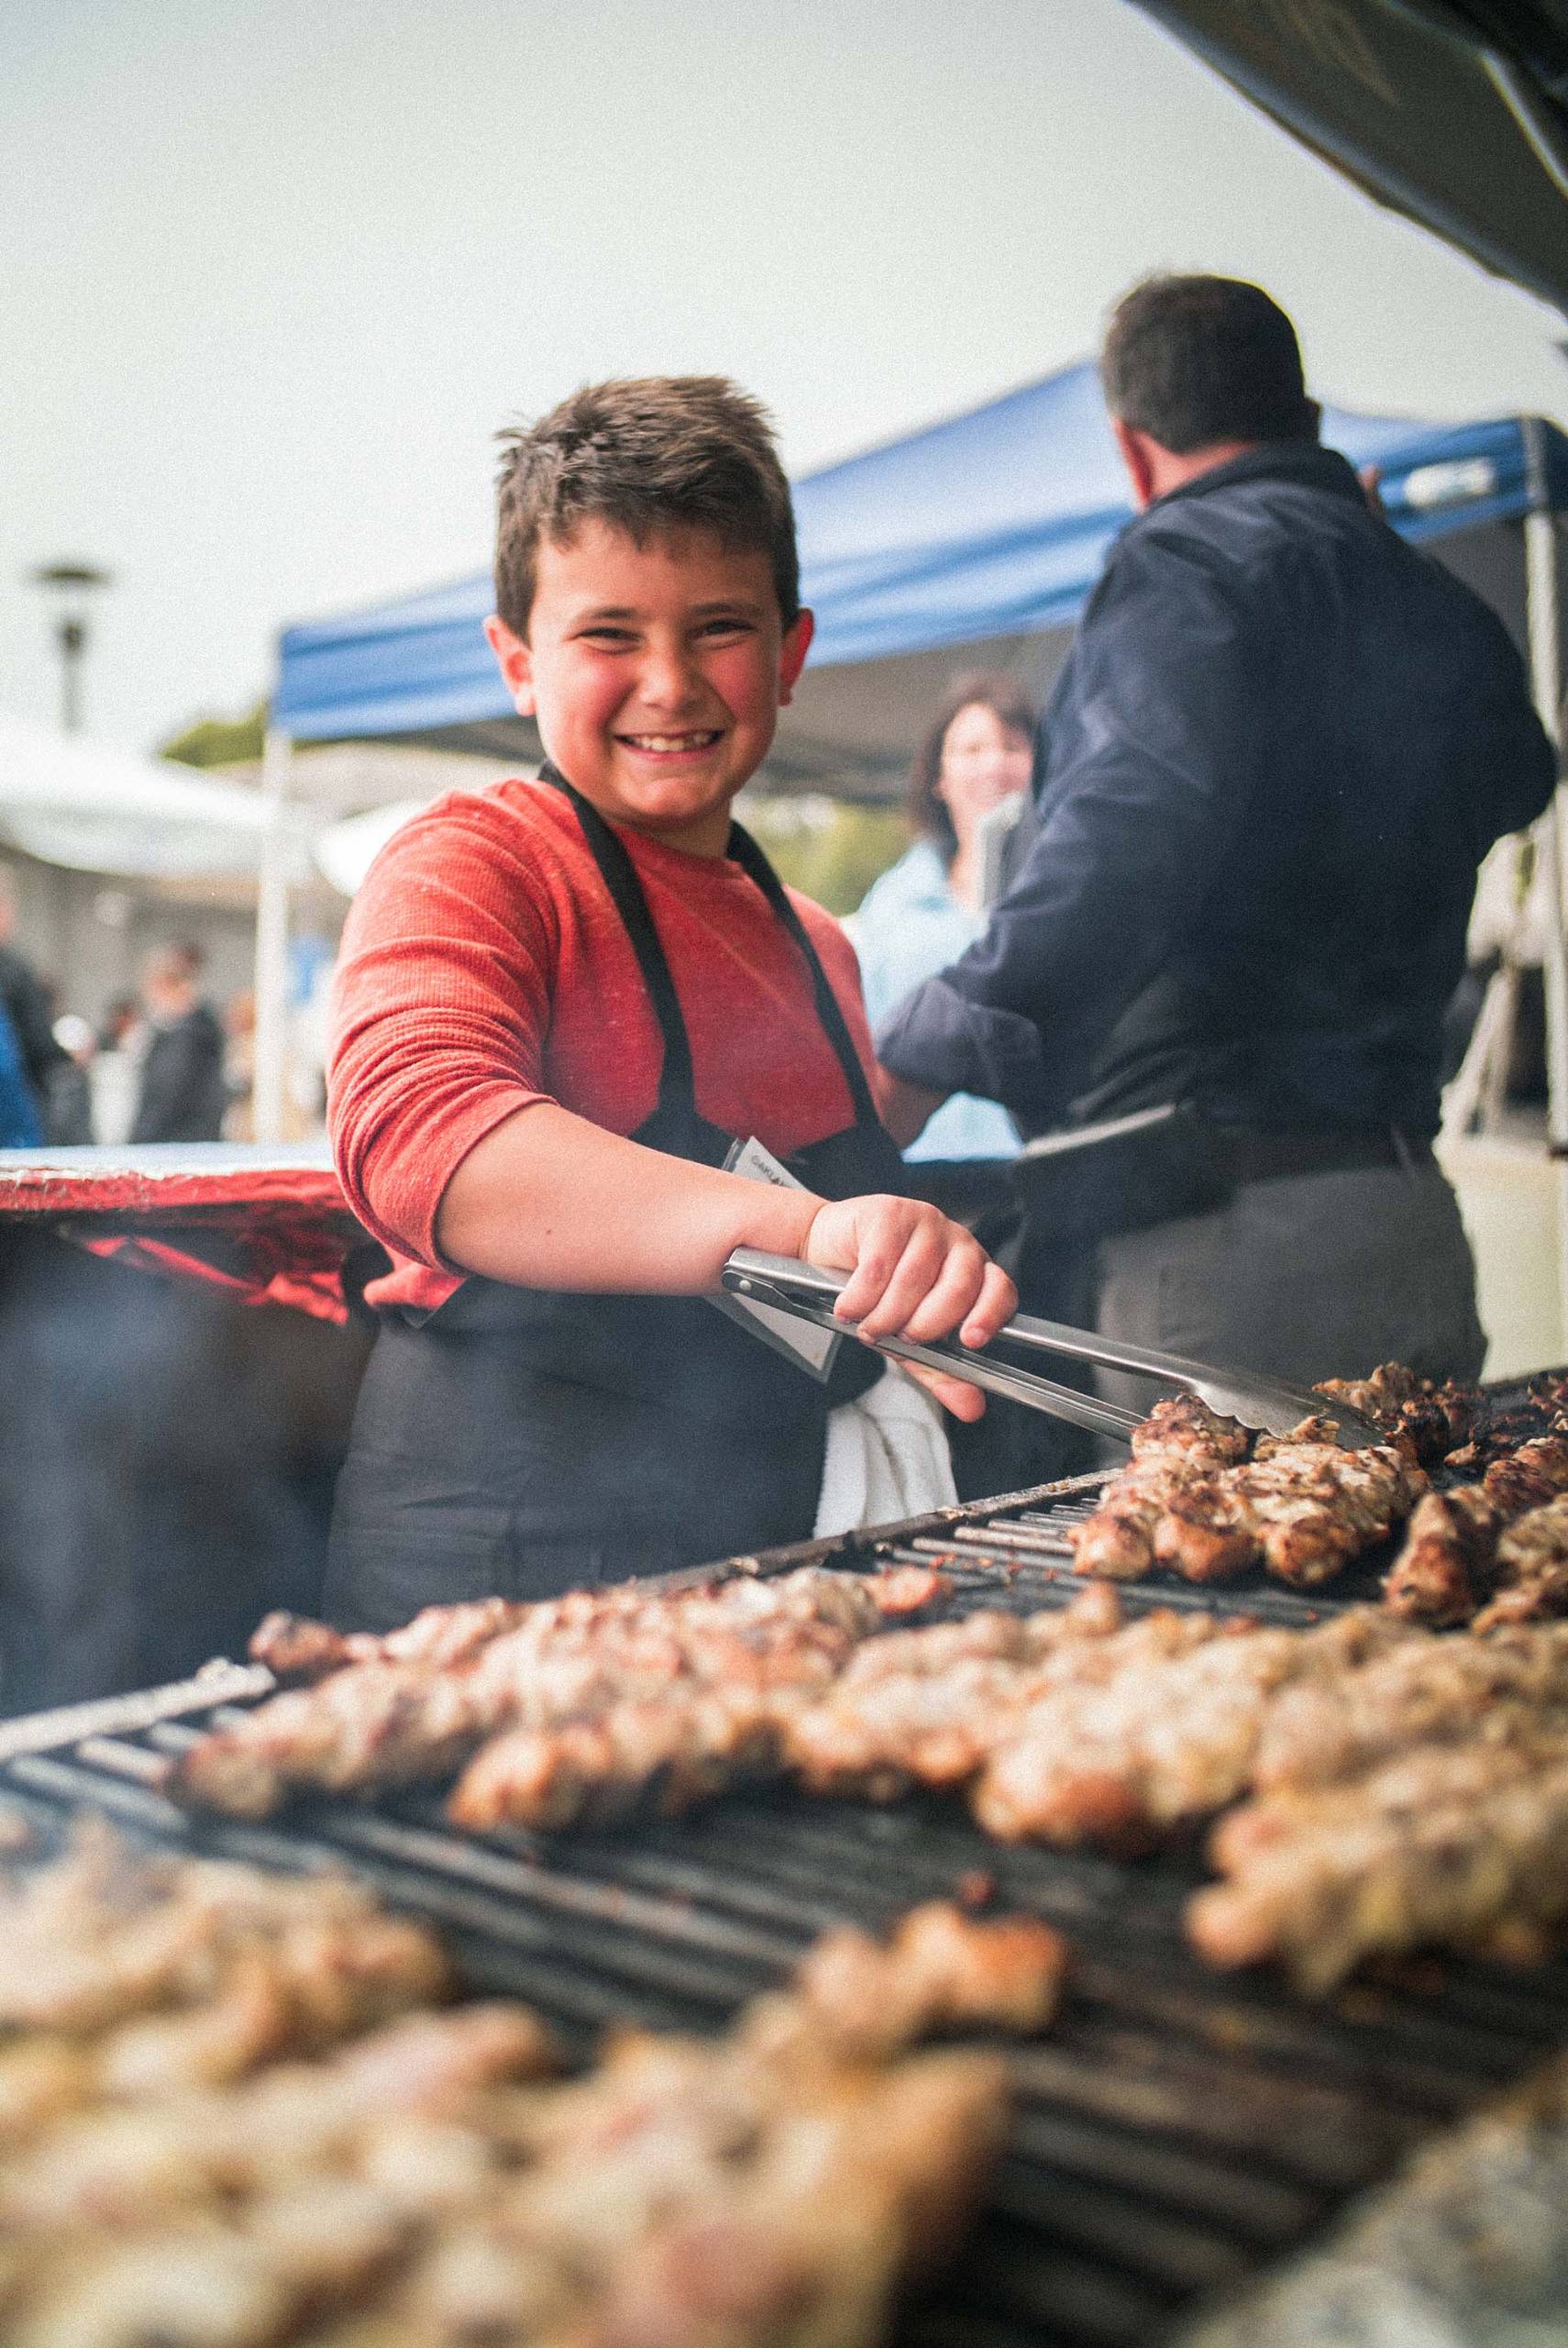 A smiling young boy holds a pair of metal tongs as he tends to lamb kebabs cooking on the grill.